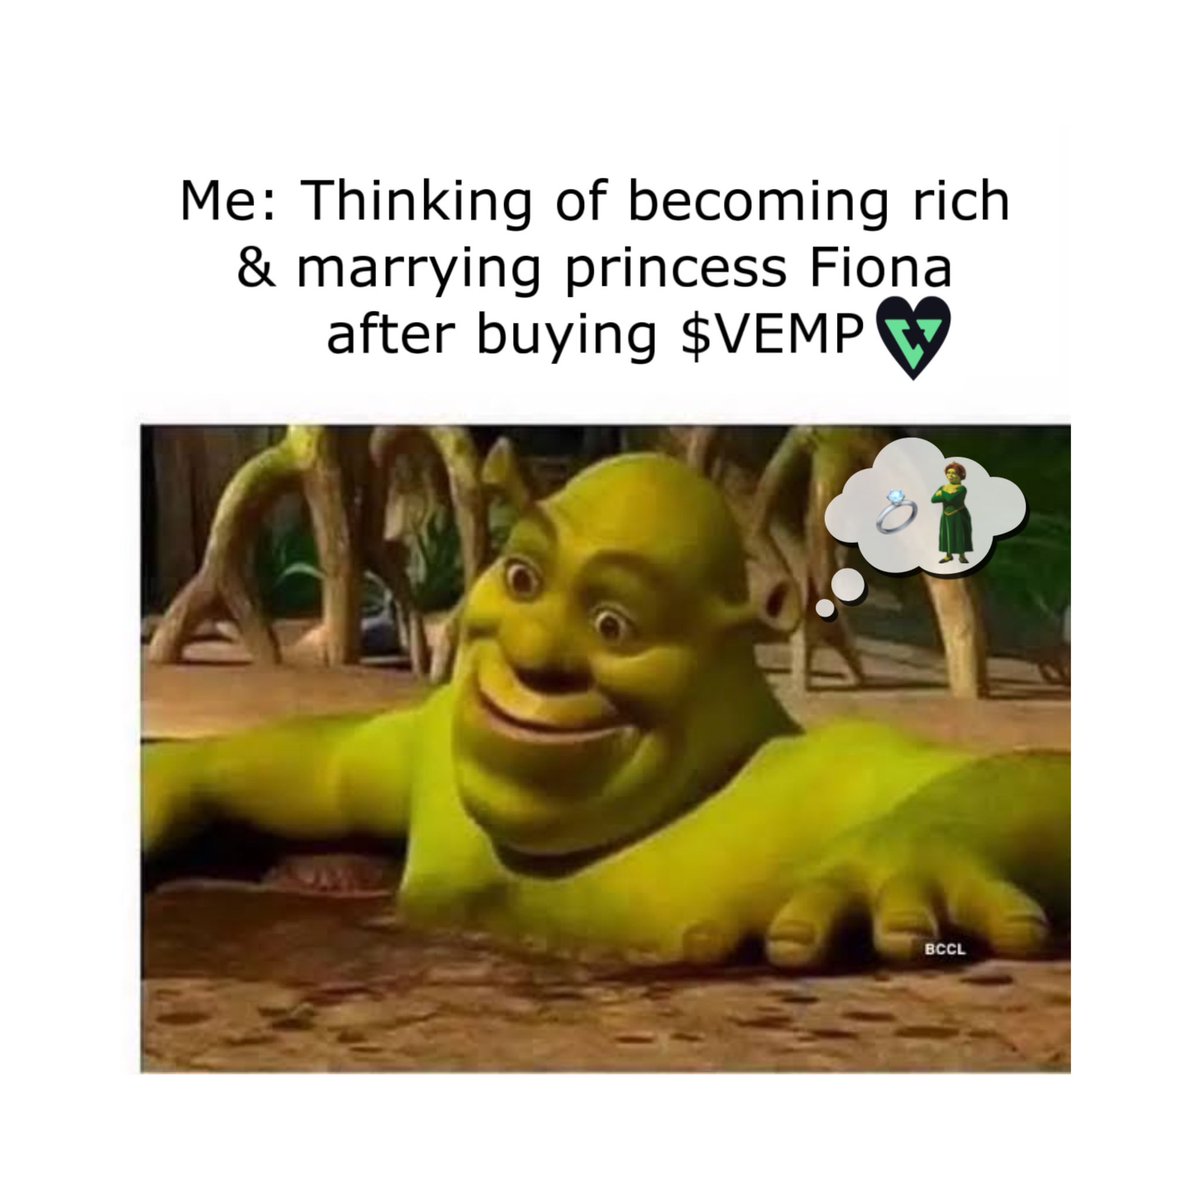 Oh! Shrek has also entered the digital world and bought $VEMP 

Let’s join him! 

#VEMP #DigitalWorld #cryptomemes #CryptoCommunity #cryptocurrency #Web3Gaming #PumpAndDump